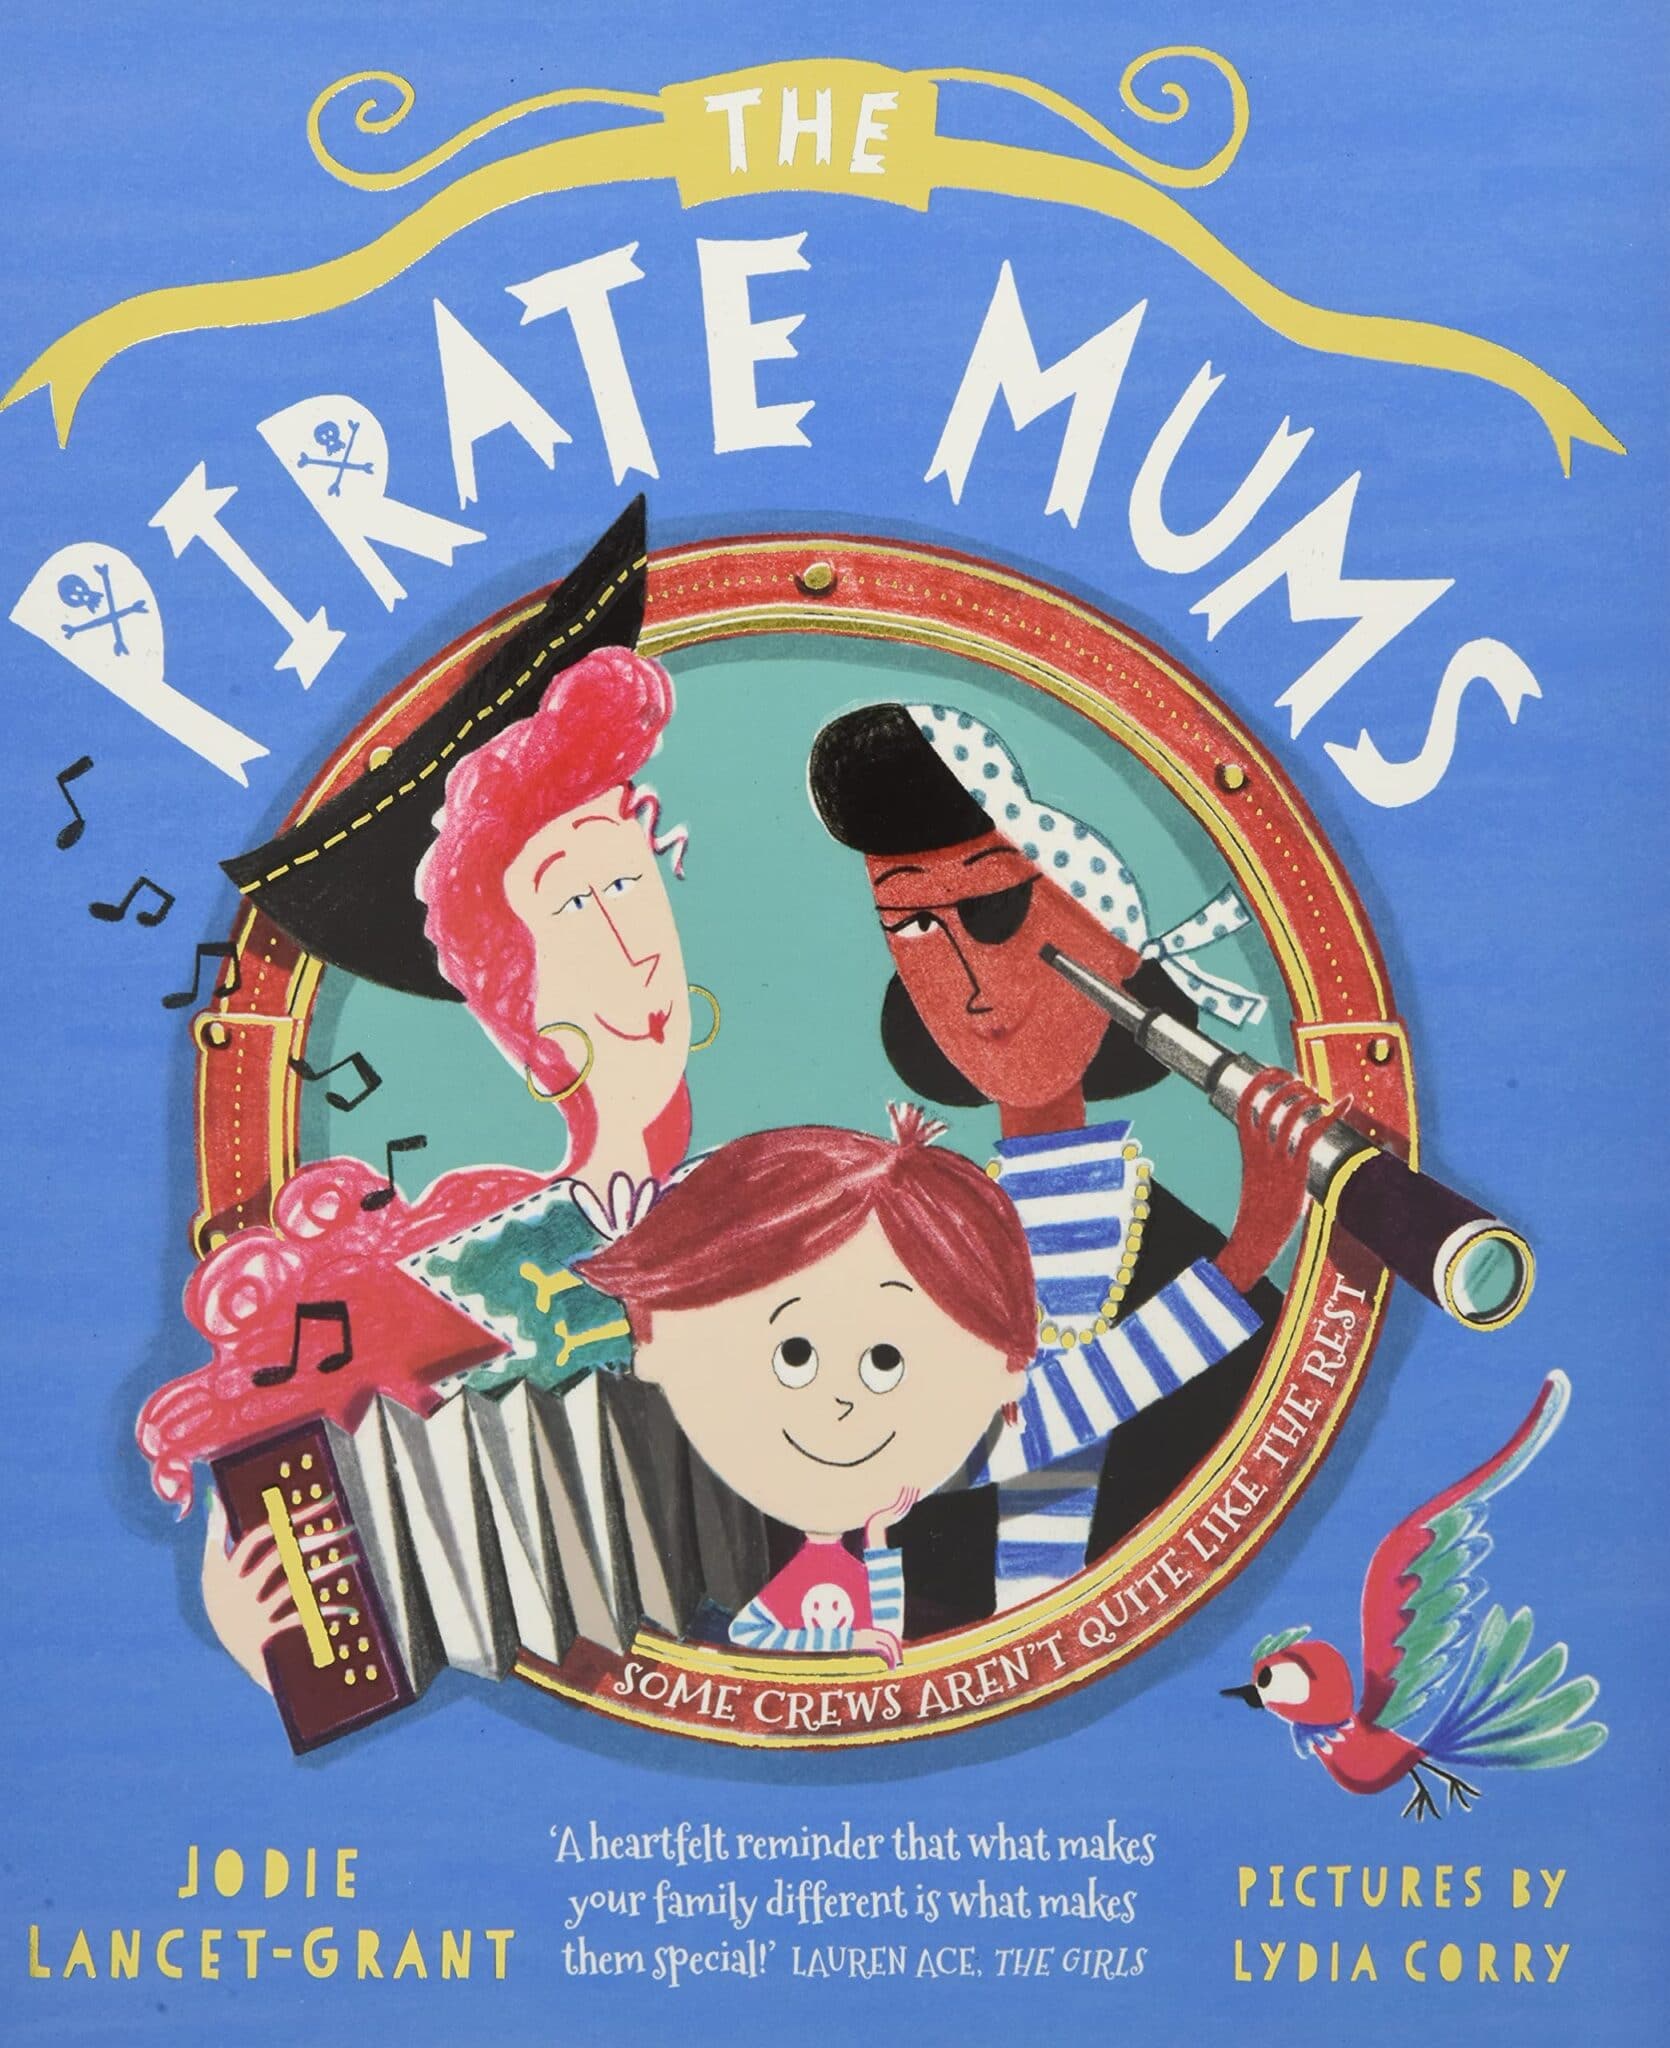 The Pirate Mums by Jodie Lancet-Grant.